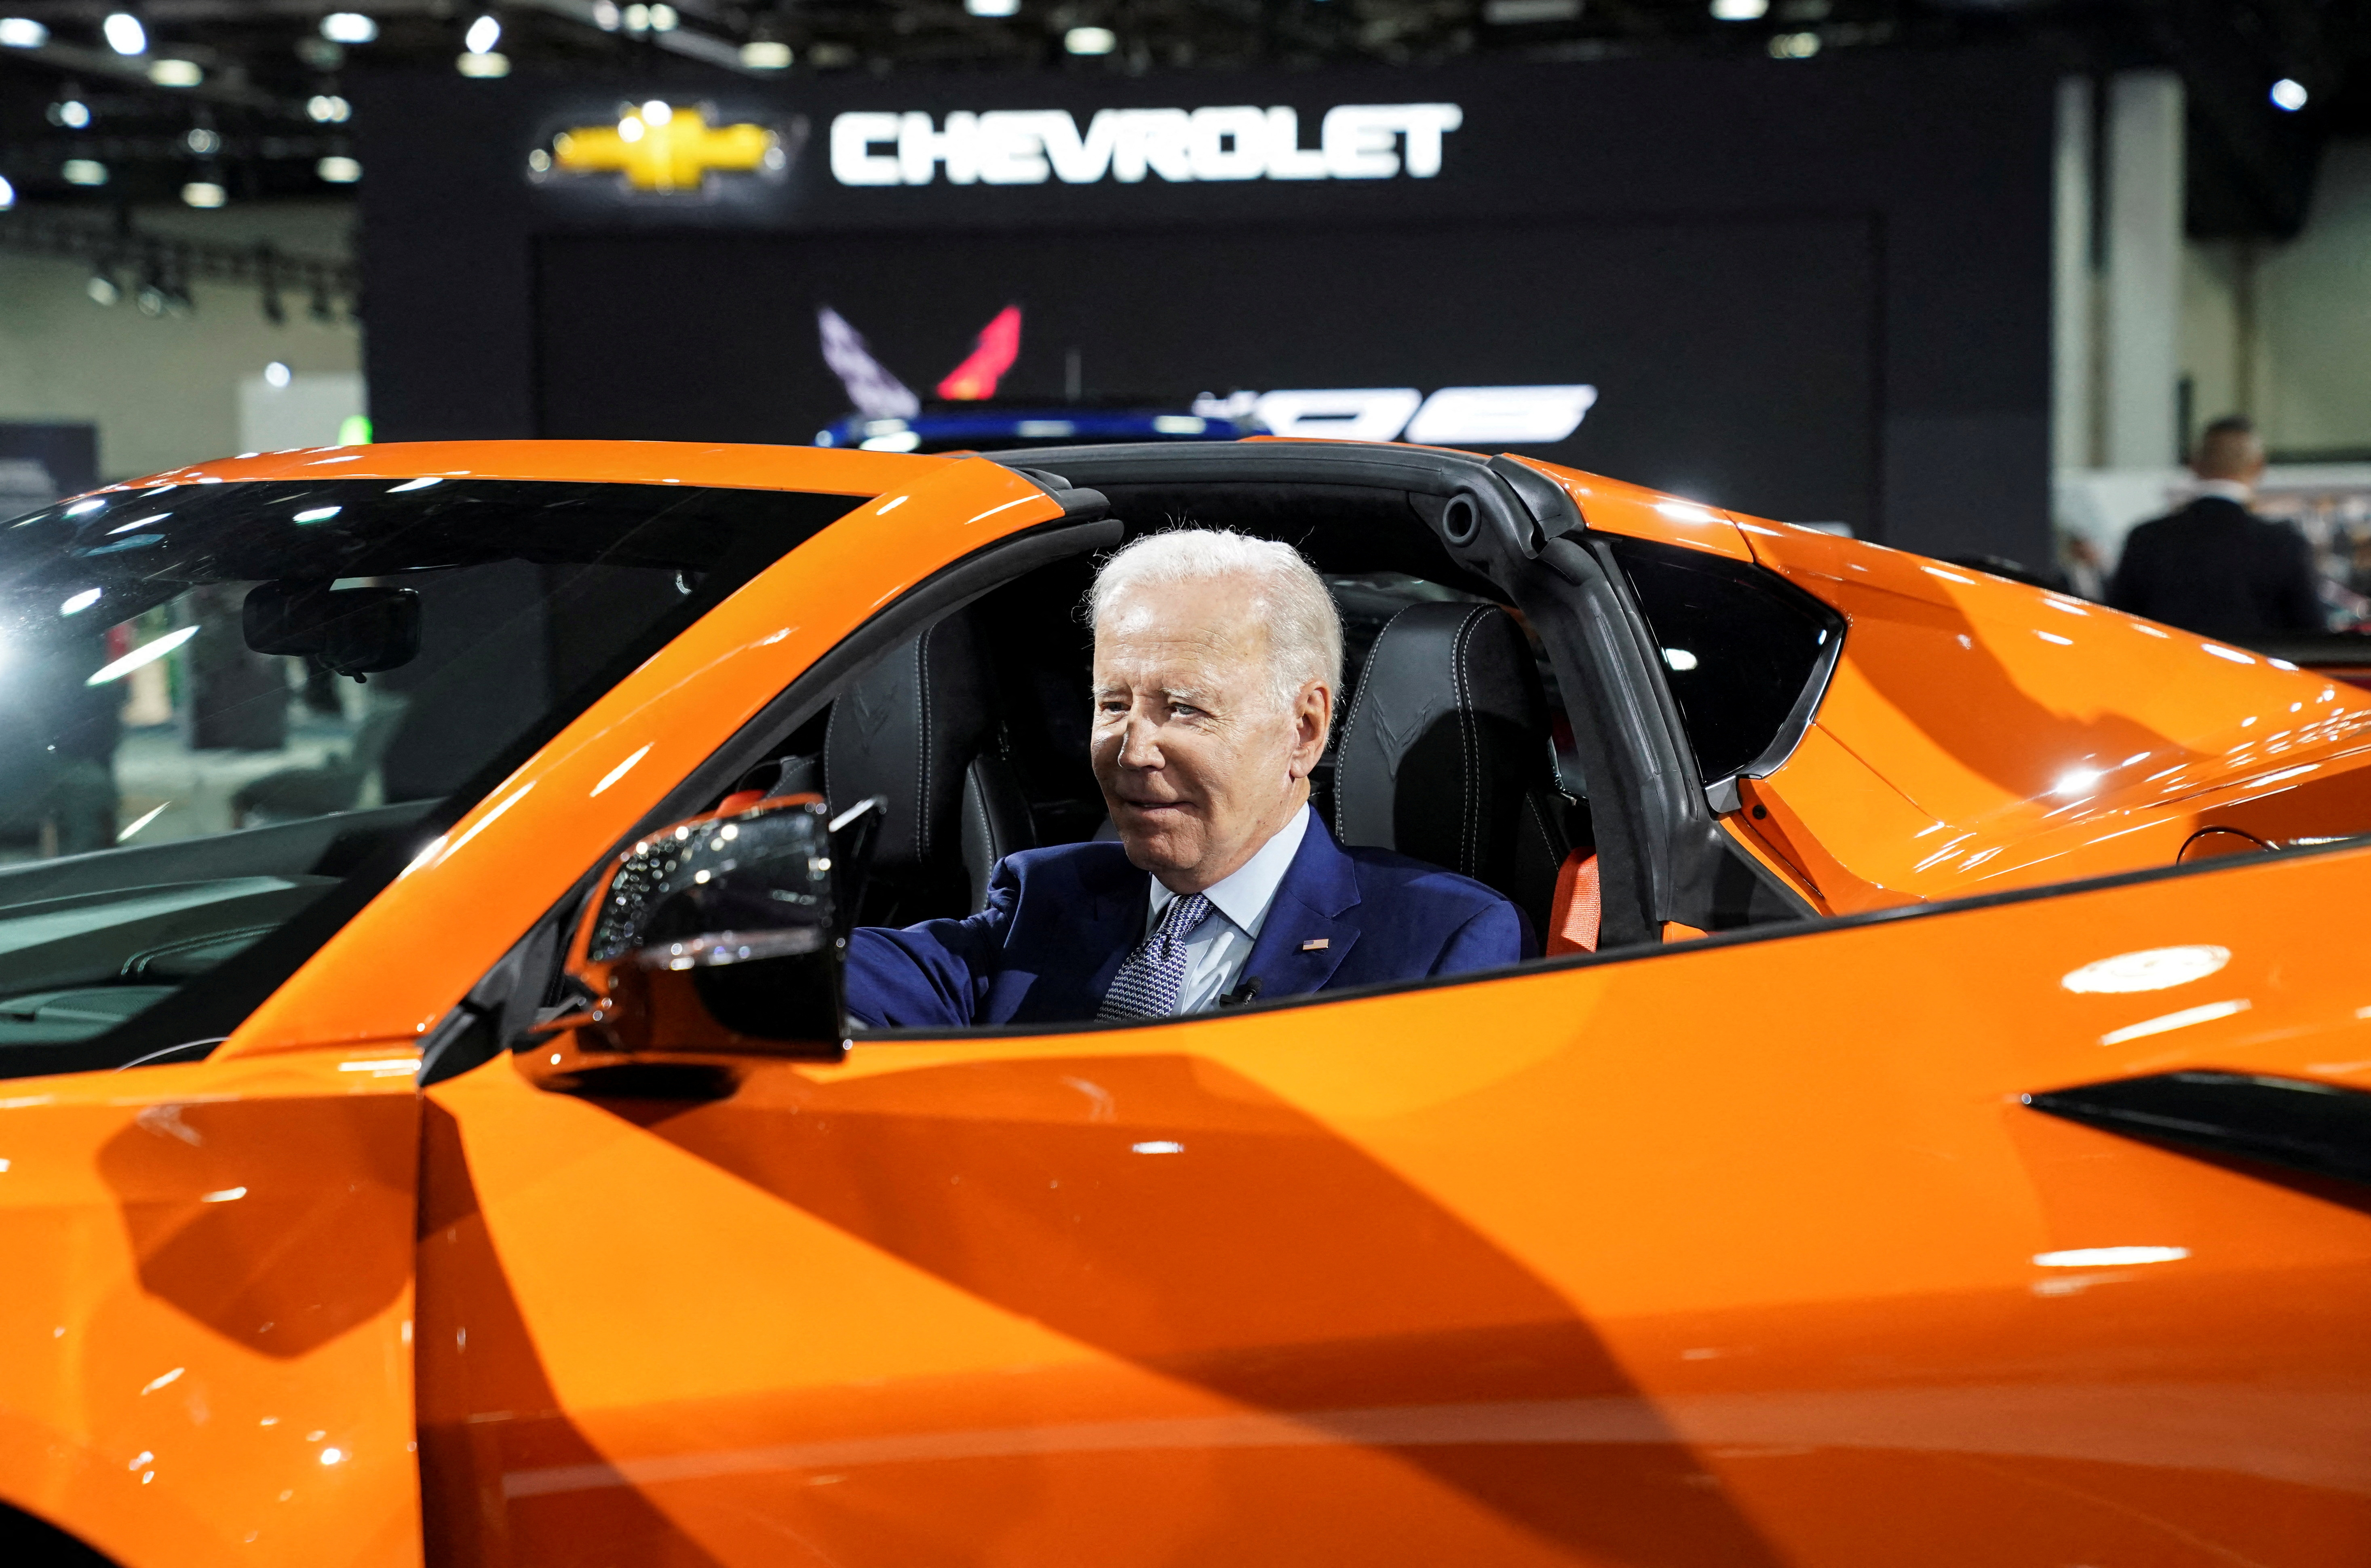 US President Joe Biden sits in a Chevrolet Corvette Z06 during a visit to the Detroit Auto Show to highlight American electric vehicle manufacturing, in Detroit, Michigan, US on September 14, 2022.  REUTERS/Kevin Lamarck/File